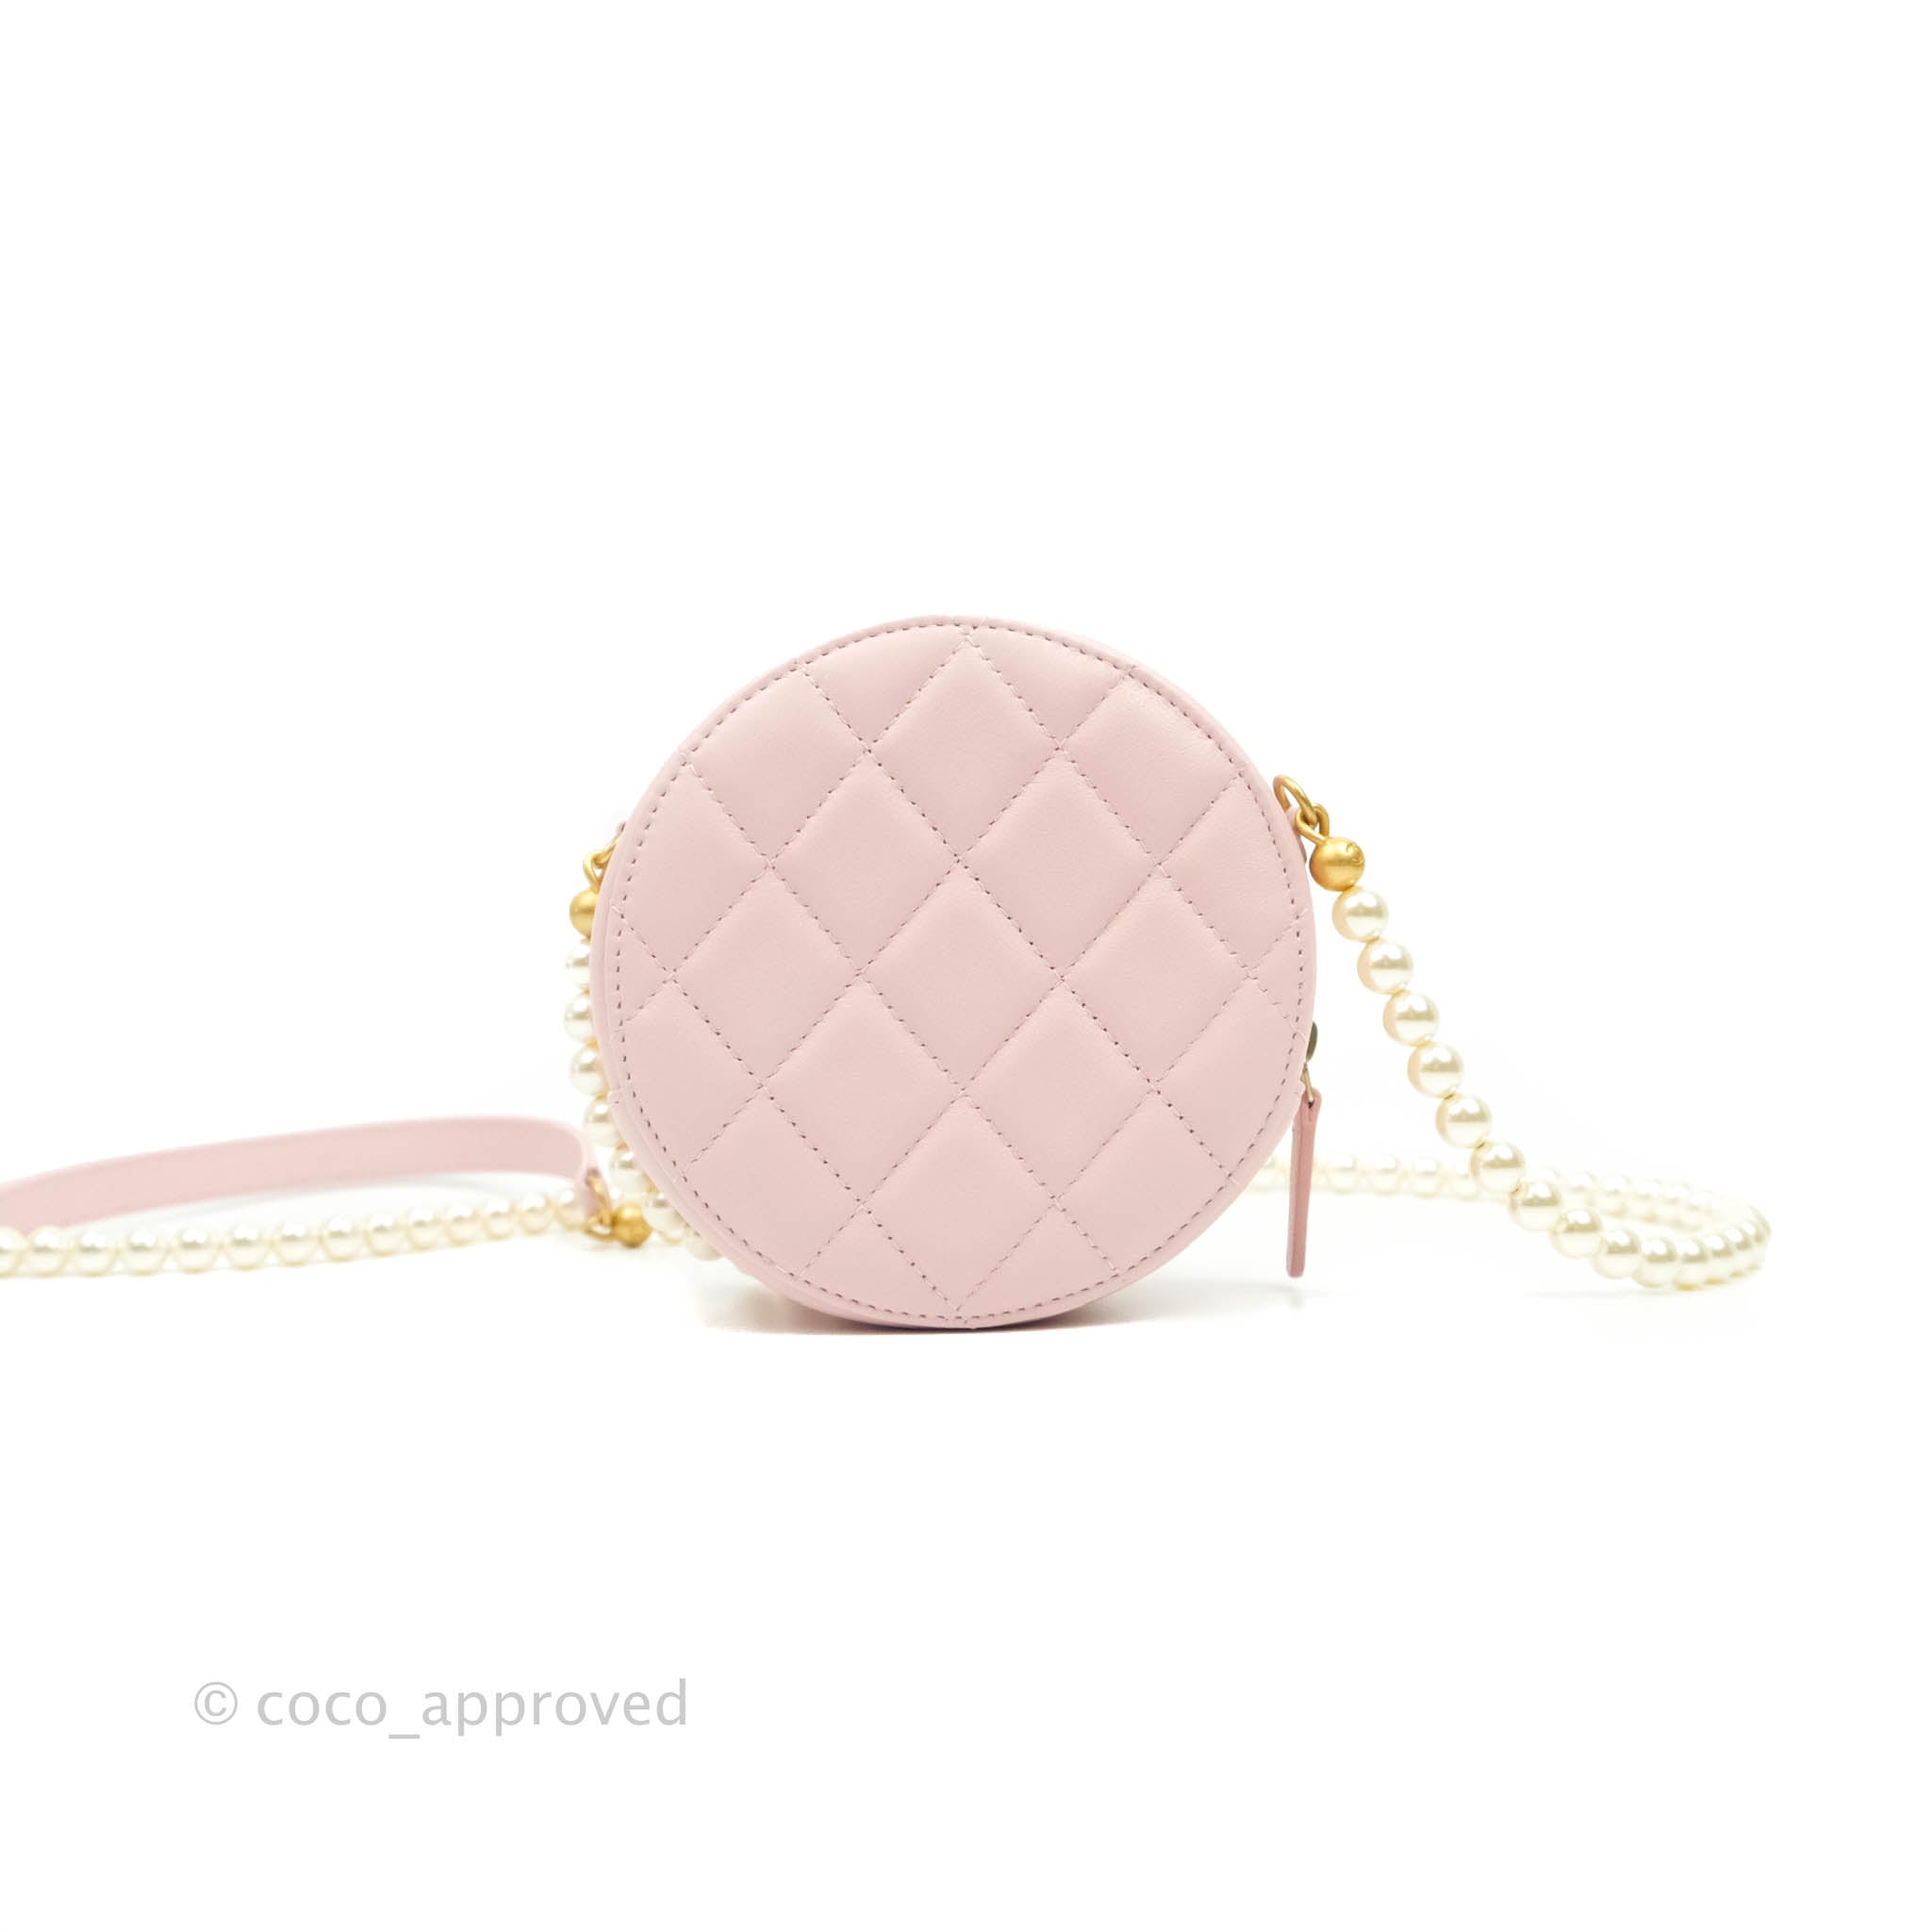 Chanel Clutch with Chain AP3010 B09158 NK343 , Pink, One Size